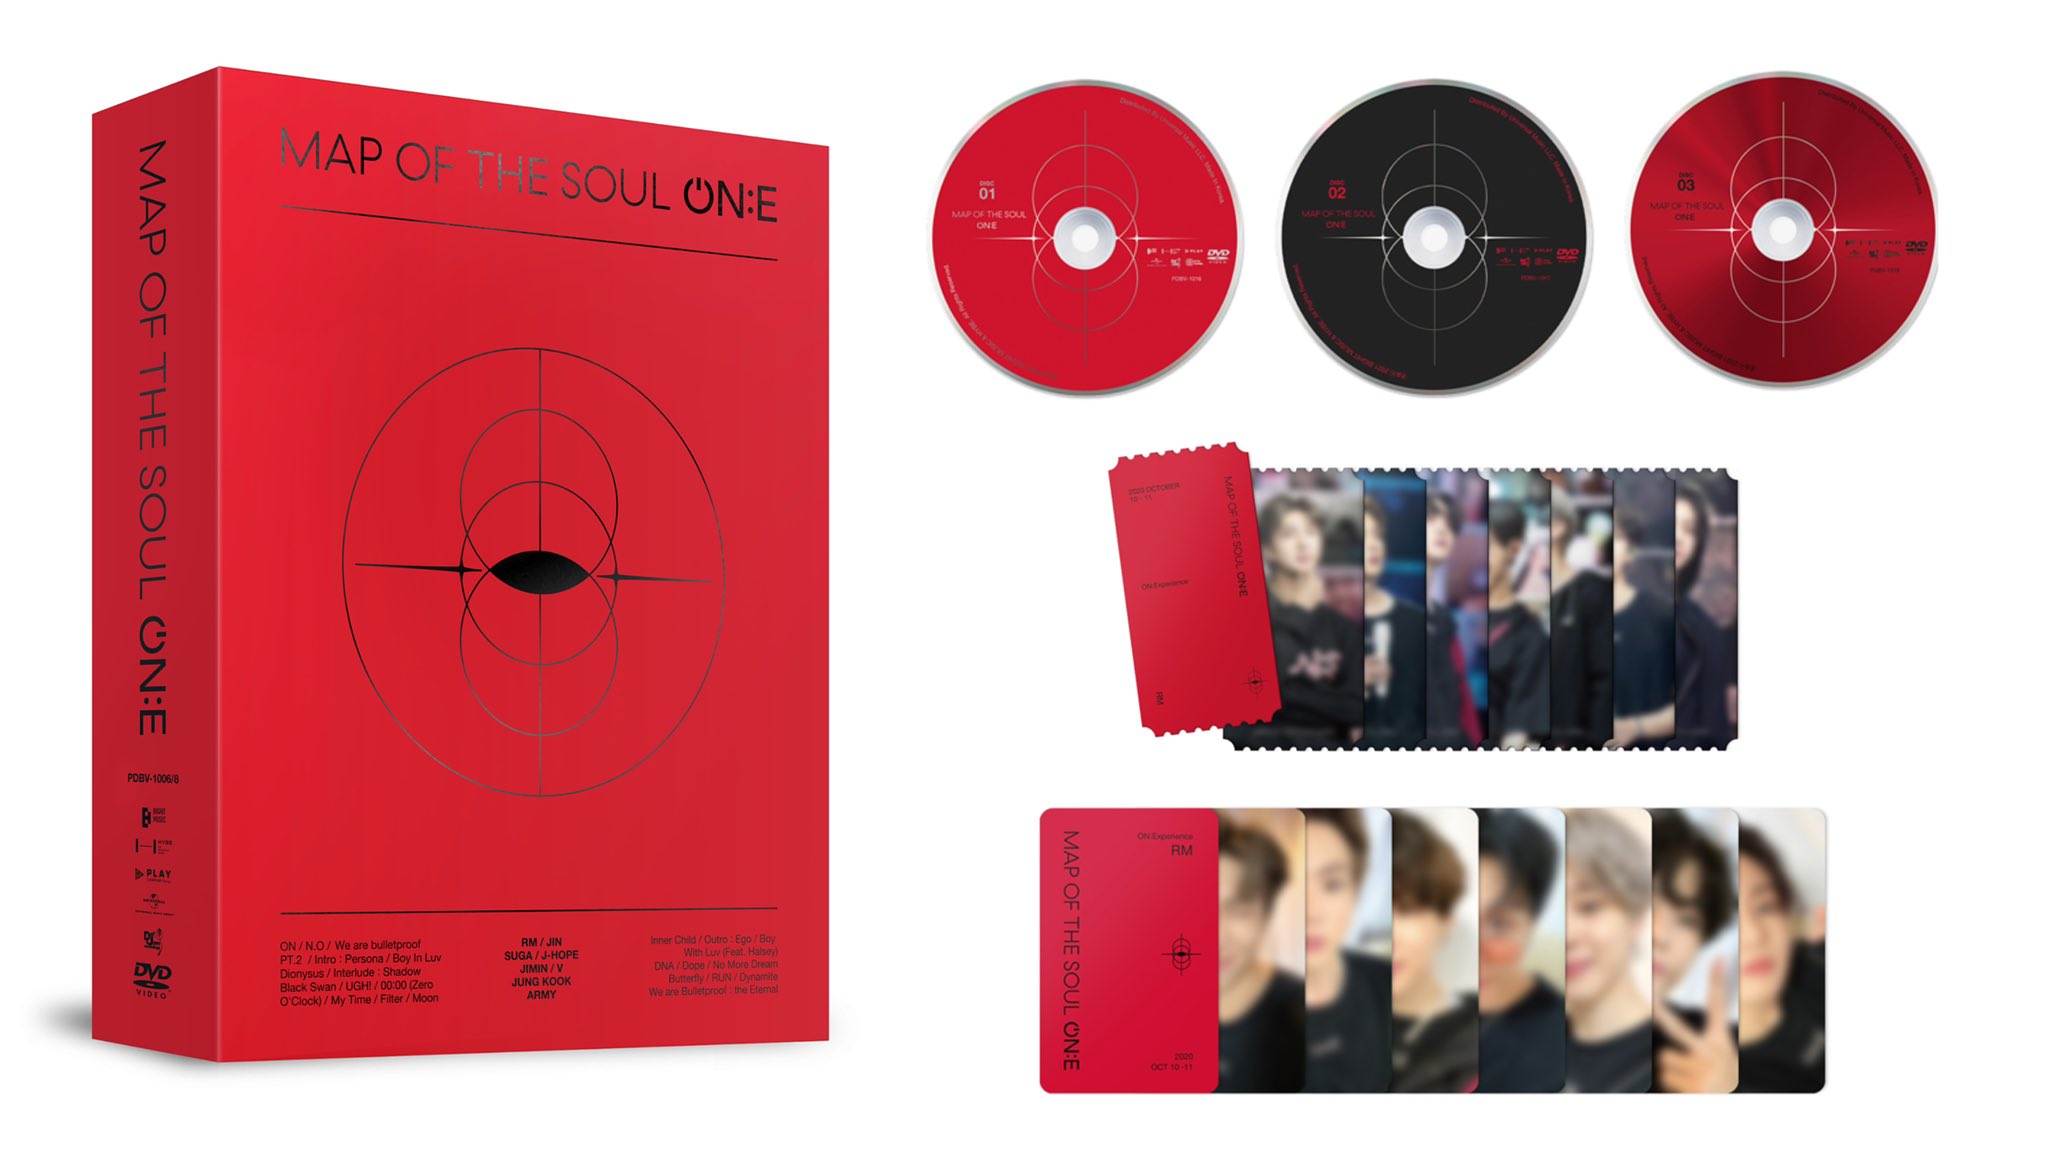 BTS MAP OF THE SOUL ONE DVD